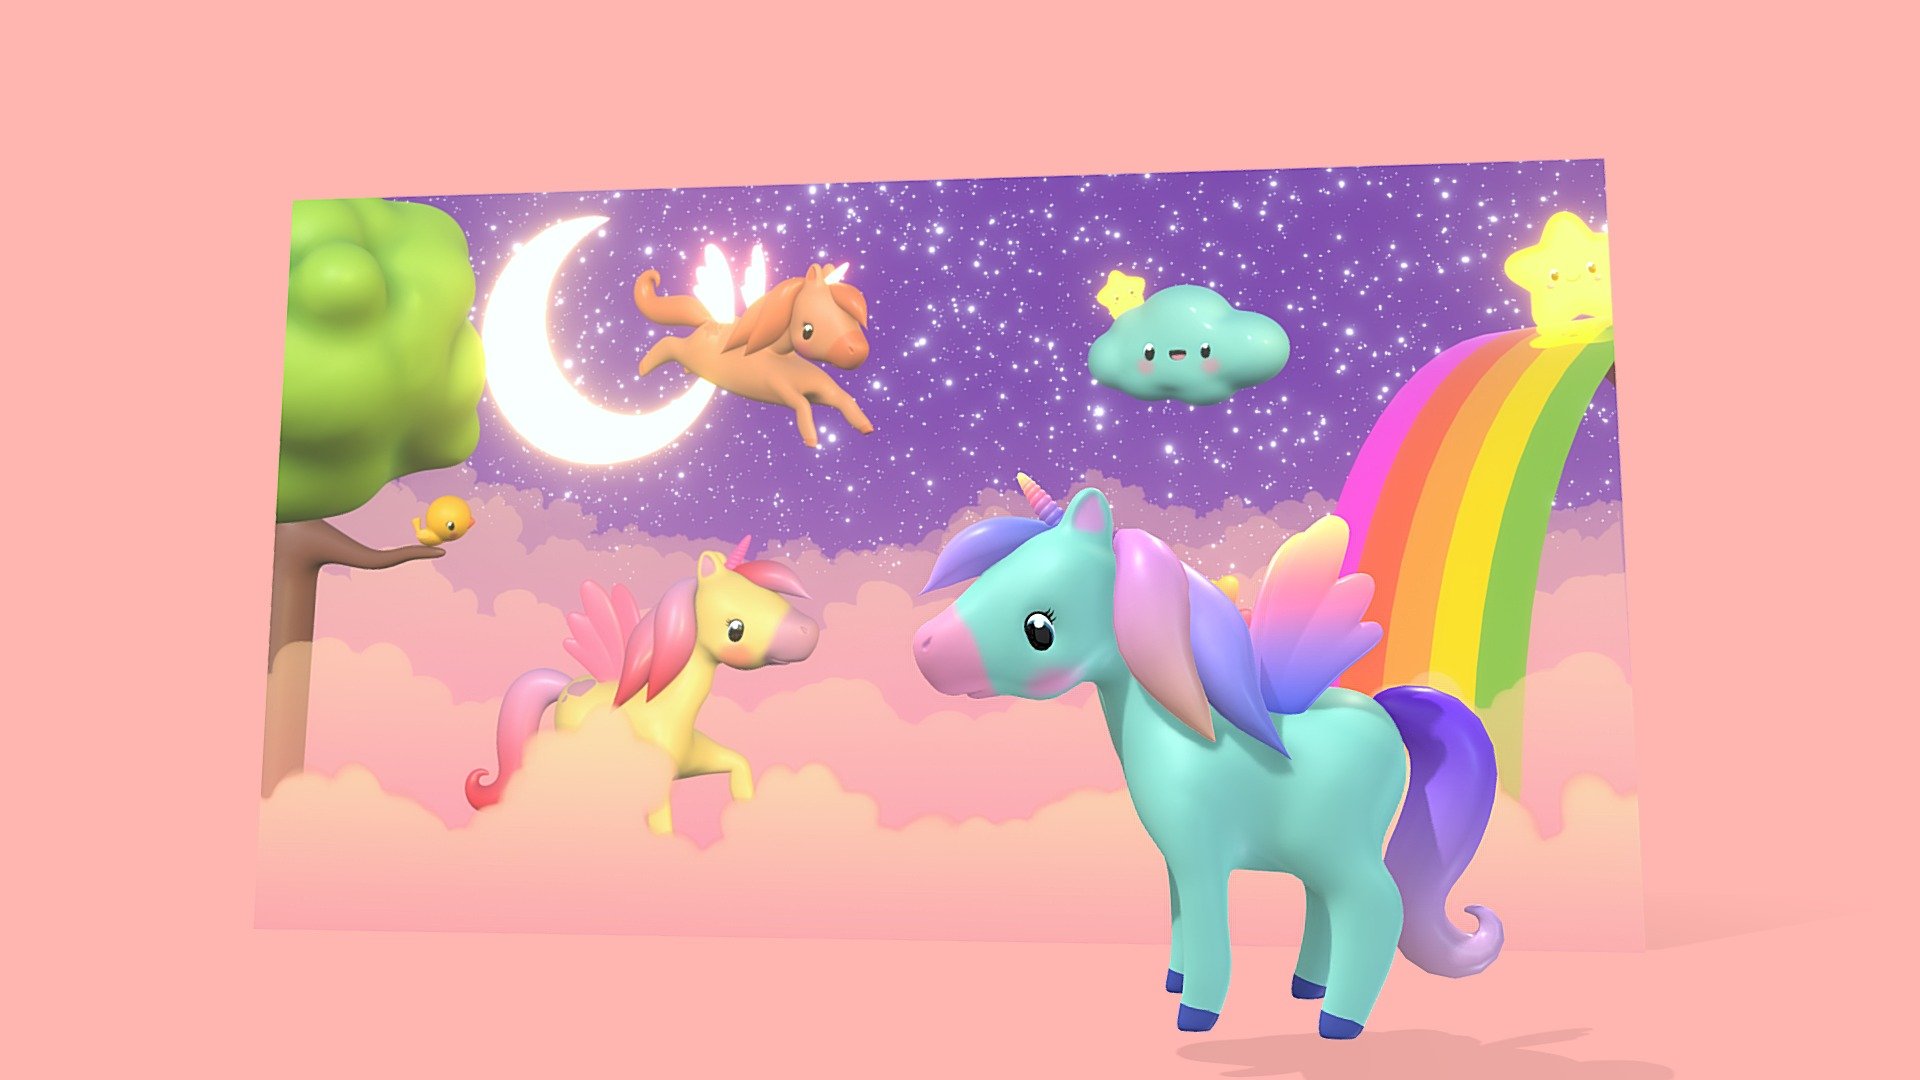 Happy, Bright, and super colorful

This magical unicorn has it all

Fully rigged, and its ready to fly right away 😇😍👼🦄

Just change the textures and colors and you can have as many amazing unicorns/pegasus/ponies as you want 😃

Enjoy!!! - Stylized Toon Unicorn (rigged) - Buy Royalty Free 3D model by ahingel 3d model